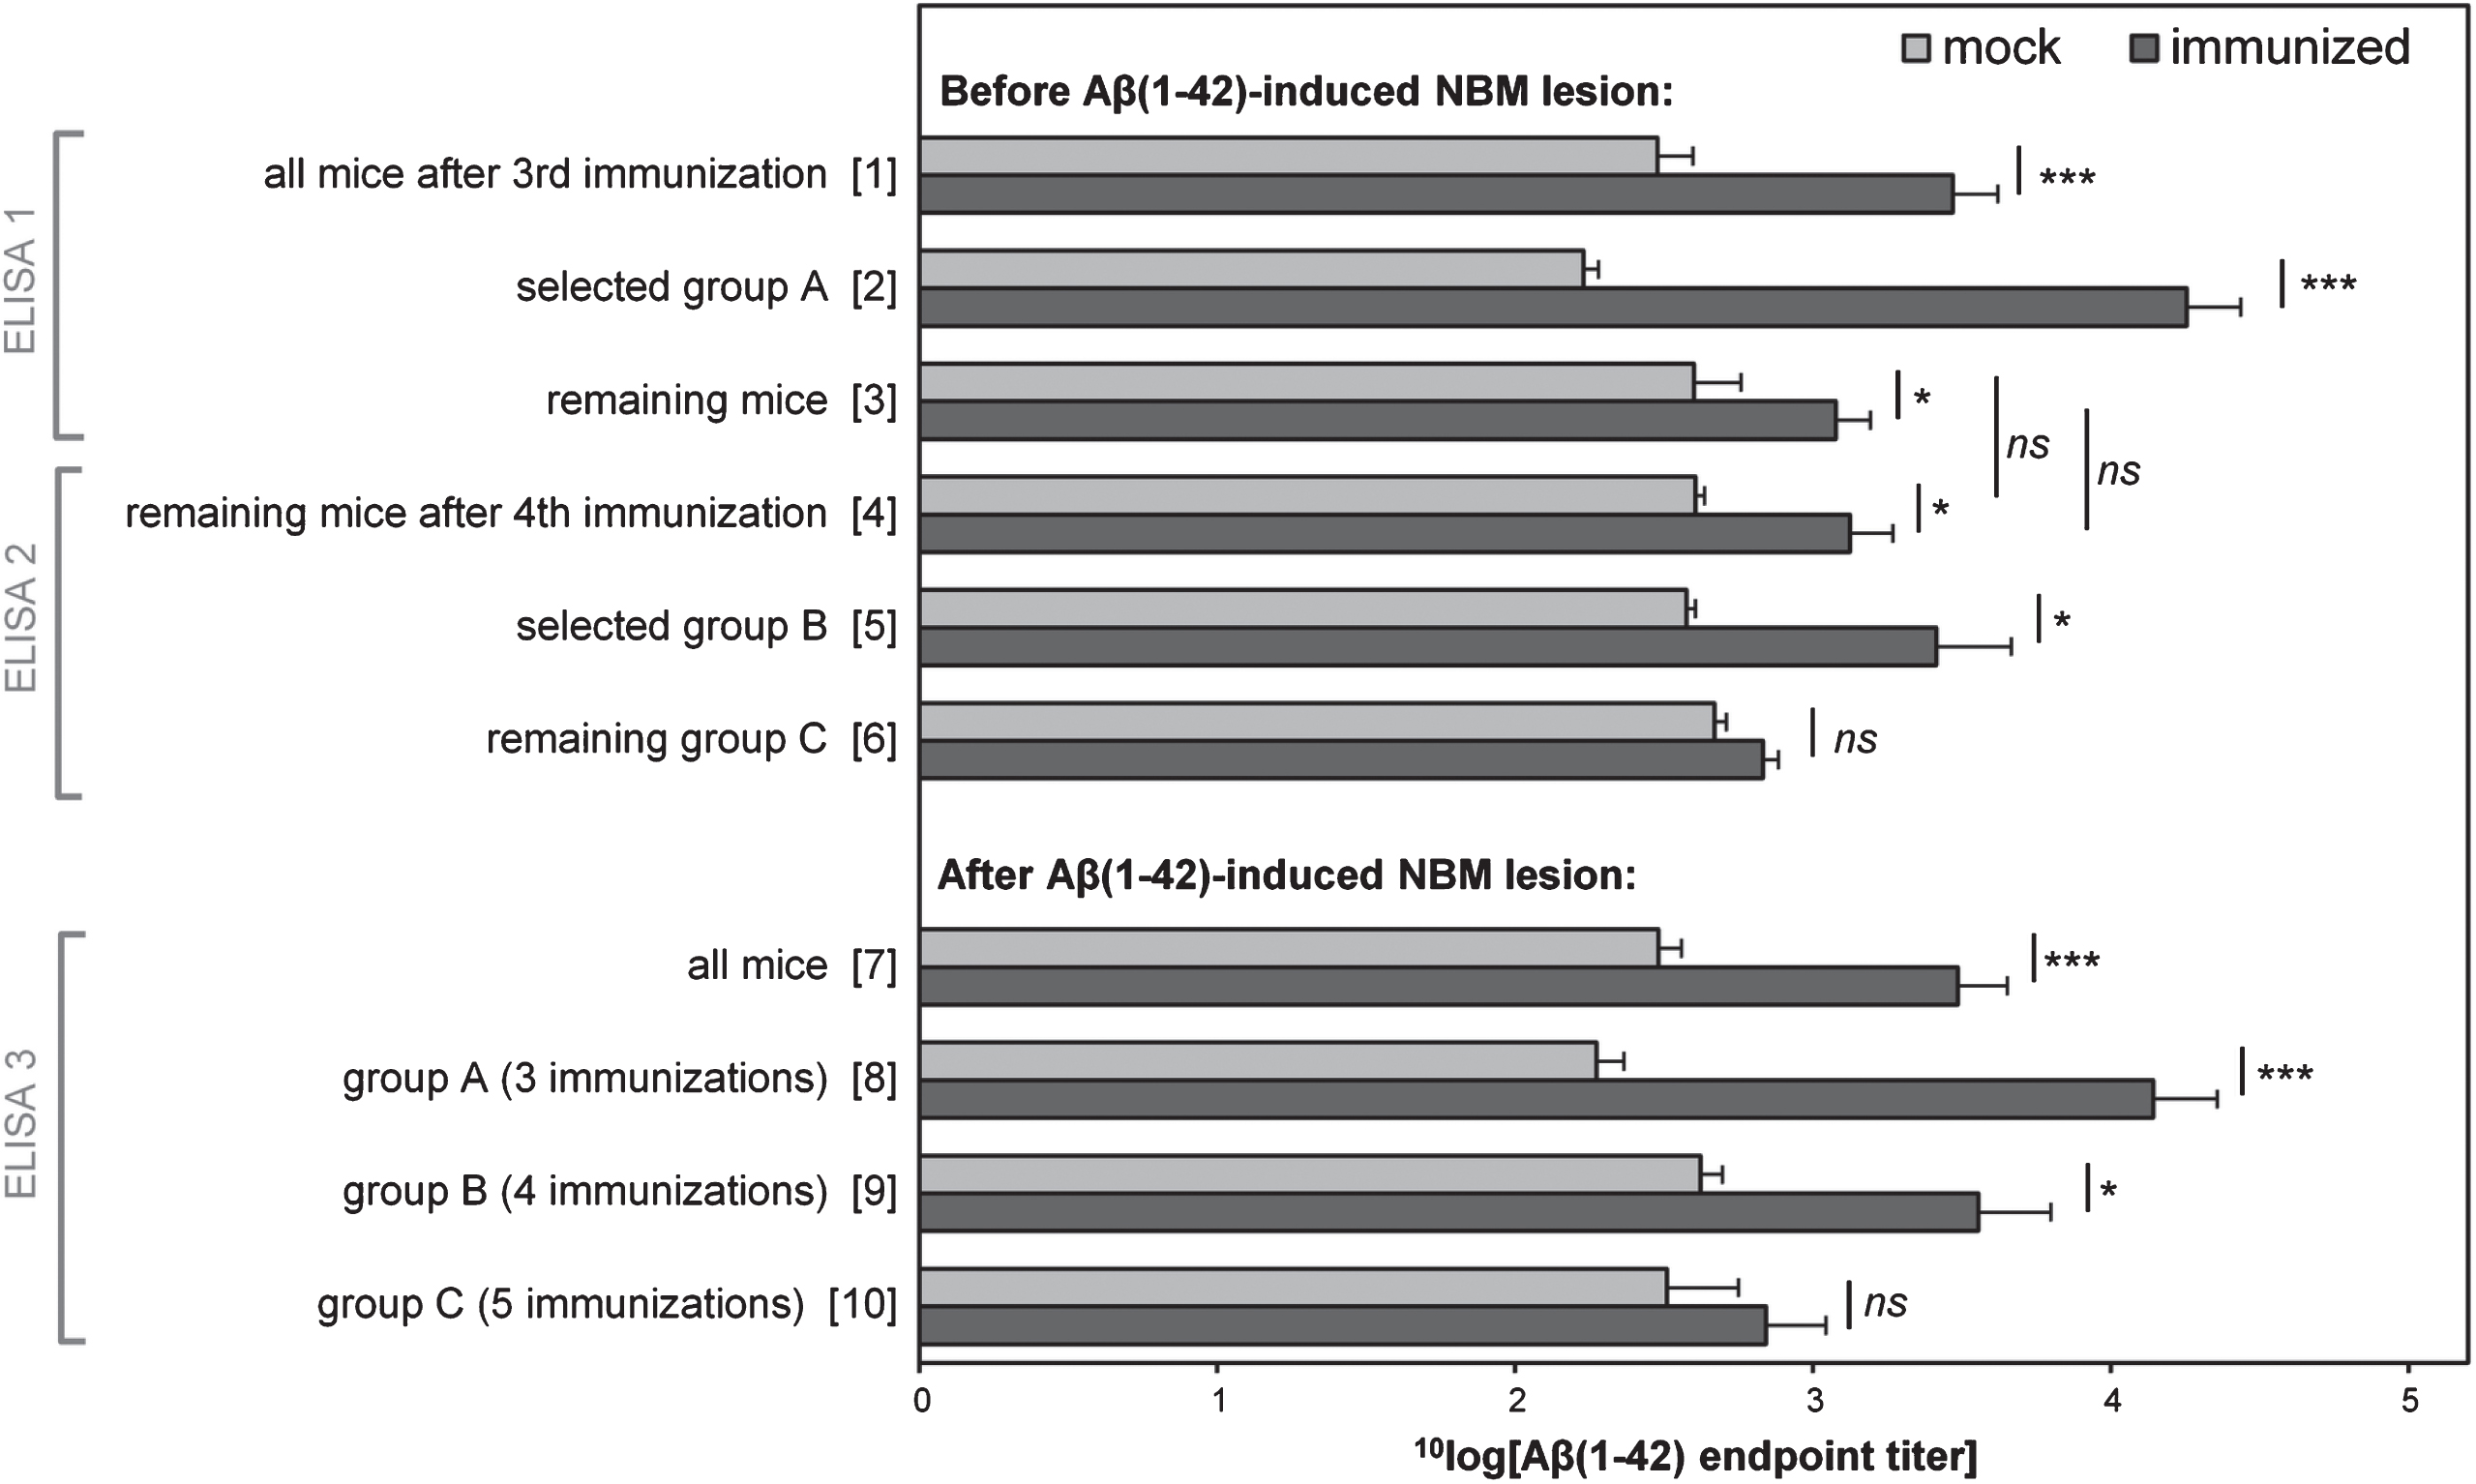 Average of the 10log value of anti-oligomeric Aβ1-42 ELISA endpoint titers of immunized and mock mice before and after Aβ1-42-induced NBM lesions. After all mice had received three (mock-) immunizations, mice with high titers (ELISA 1) and randomly selected mock mice were selected as the first group to receive NBM lesion surgery (group A). Remaining mice received a fourth (mock-) immunization. Again, mice with high titers (ELISA 2) and randomly selected mock mice were selected as the second group to receive NBM lesion surgery (group B). Remaining mice (group C) received a fifth (mock-) immunization before lesion surgery. Measurements before NBM lesions (ELISA 1 and 2) were performed on sera from blood samples collected from the tail vein. Measurements after NBM lesions (ELISA 3) were performed on sera from blood samples taken from the heart, just before transcardial perfusion. The results show that three rounds of immunizations are highly effective, while a fourth and fifth round of immunizations have only minor added effect. Vertical axis categories are numbered between square brackets for easy reference. Error bars represent SEM. Statistical indicators: *p < 0.05, ***p < 0.001, ns indicates p > 0.05.